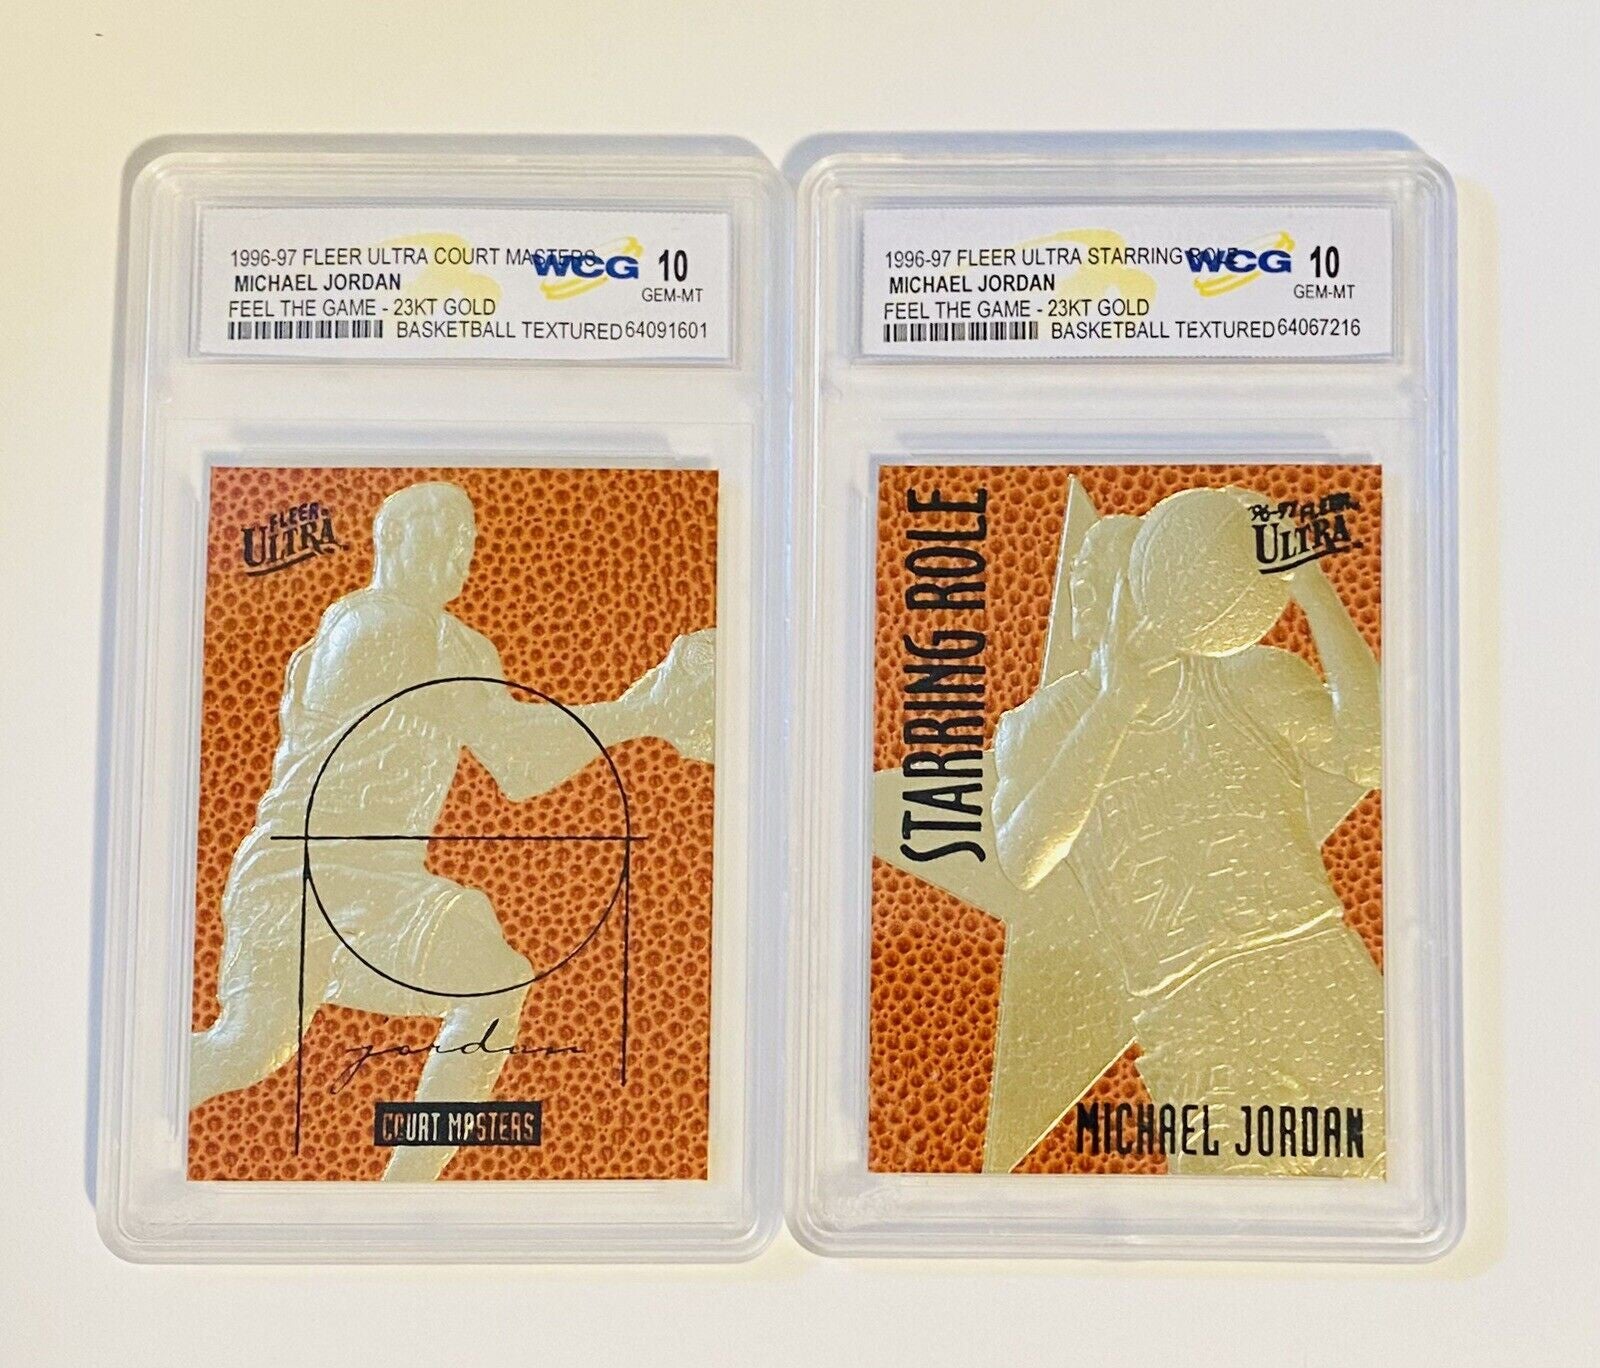 1996-97 Fleer Ultra - Feel The Game 23K Gold - Michael Jordan WCG 10 (1 Randomly Picked/Style May Not Be In Picture)